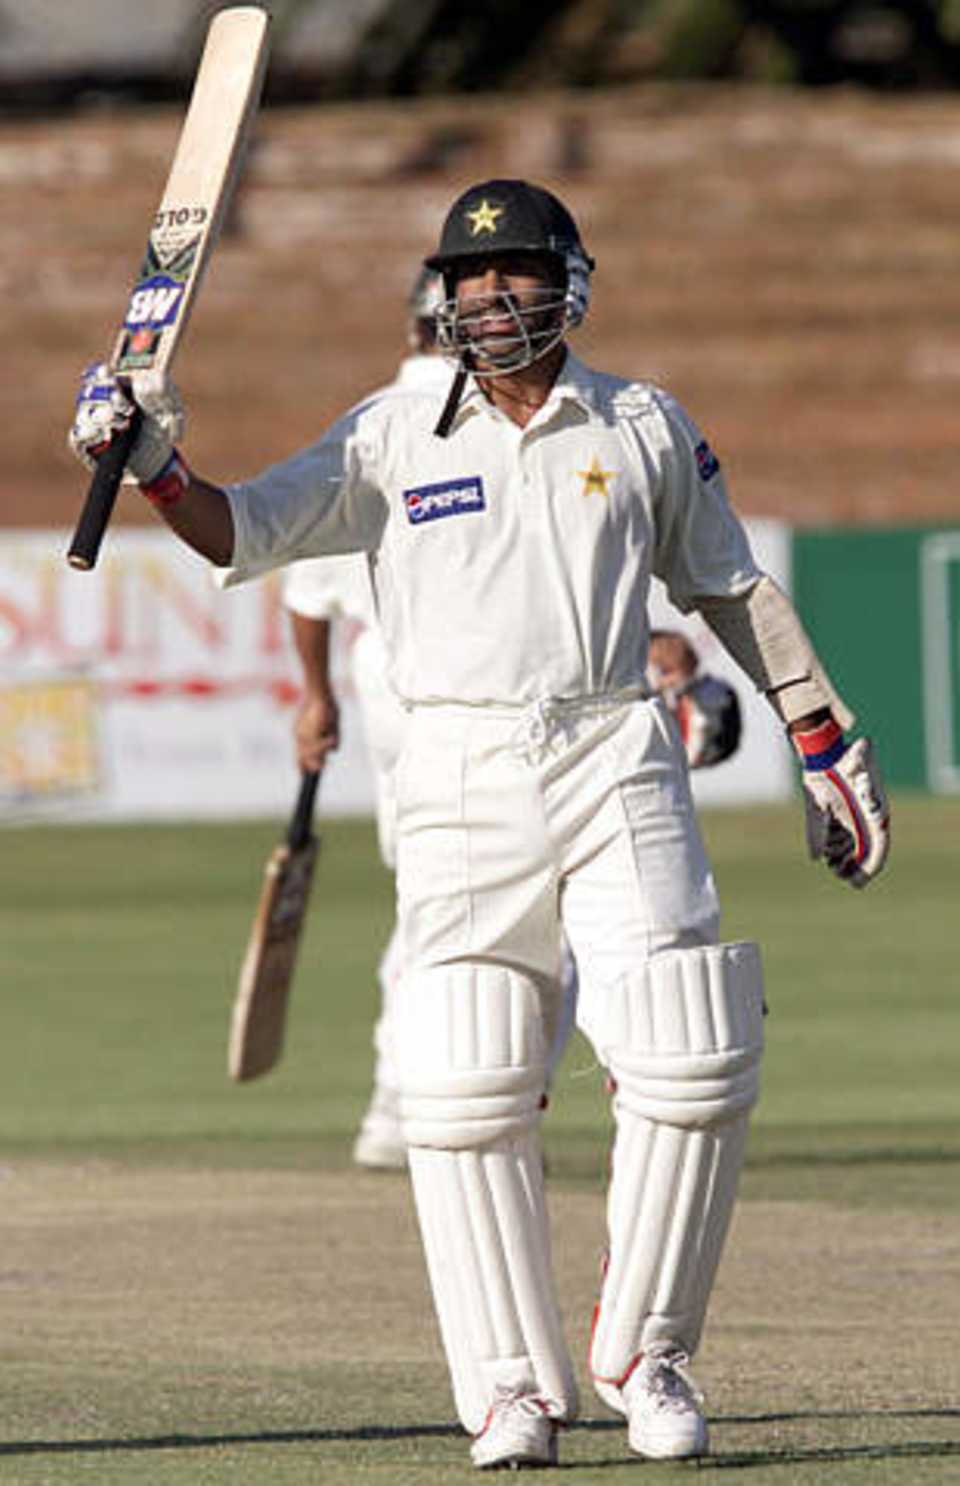 Pakistan batsman Yousuf Youhana celebrates reaching his century against Zimbabwe November 17, 2002. Youhana was undefeated on 116 runs with Pakistan on 295 runs for 5 wickets at stumps on day two of the second Test match at the Queens Sports Club in Bulawayo.